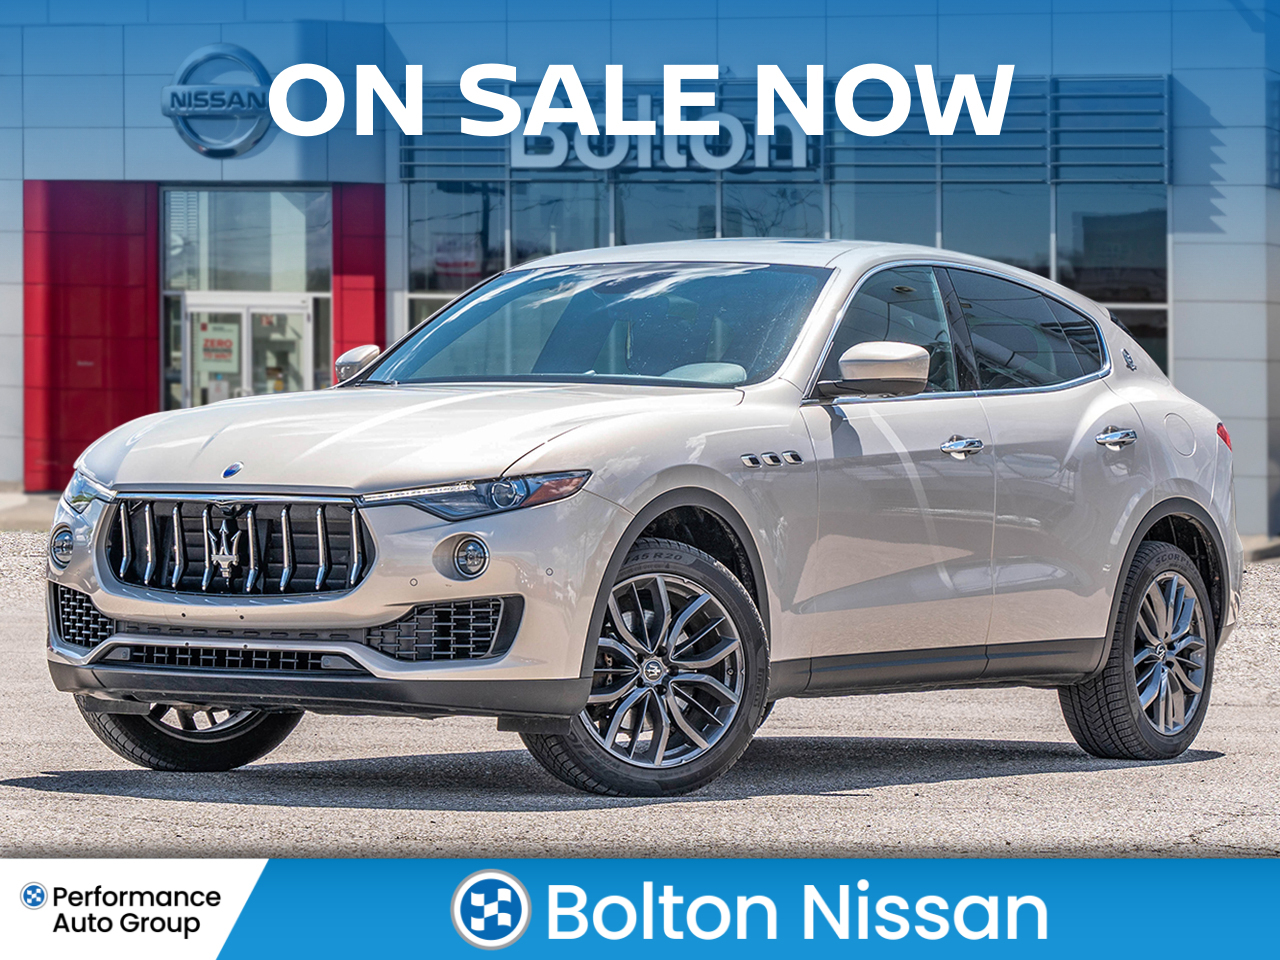 2017 Maserati Levante 3.0L*CLEAN CARFAX*ONE OWNER*BLIND SPOT*PANO ROOF**